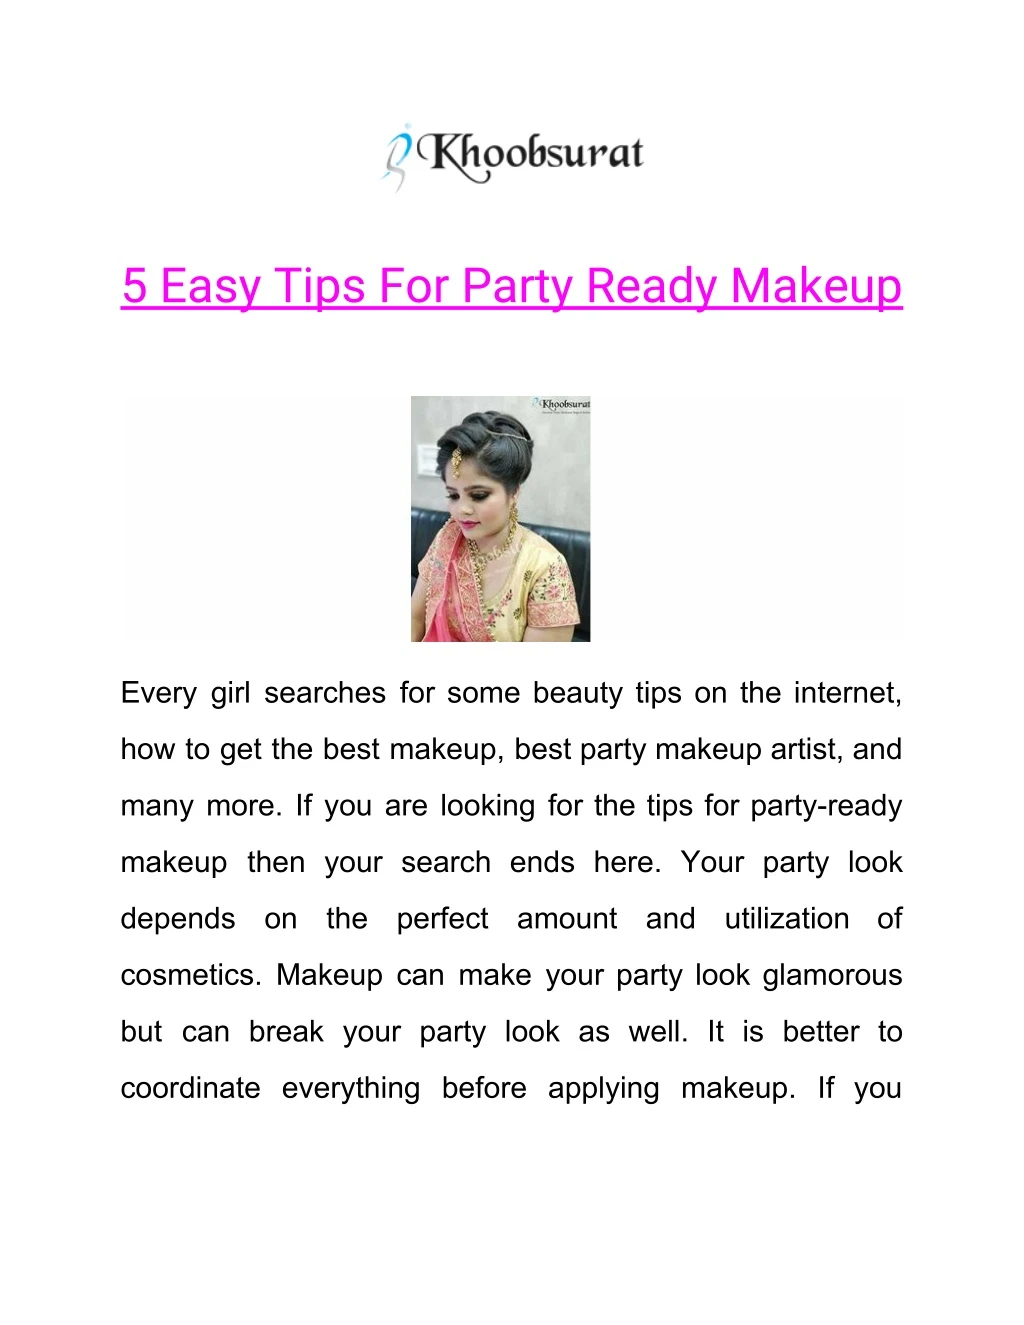 5 easy tips for party ready makeup